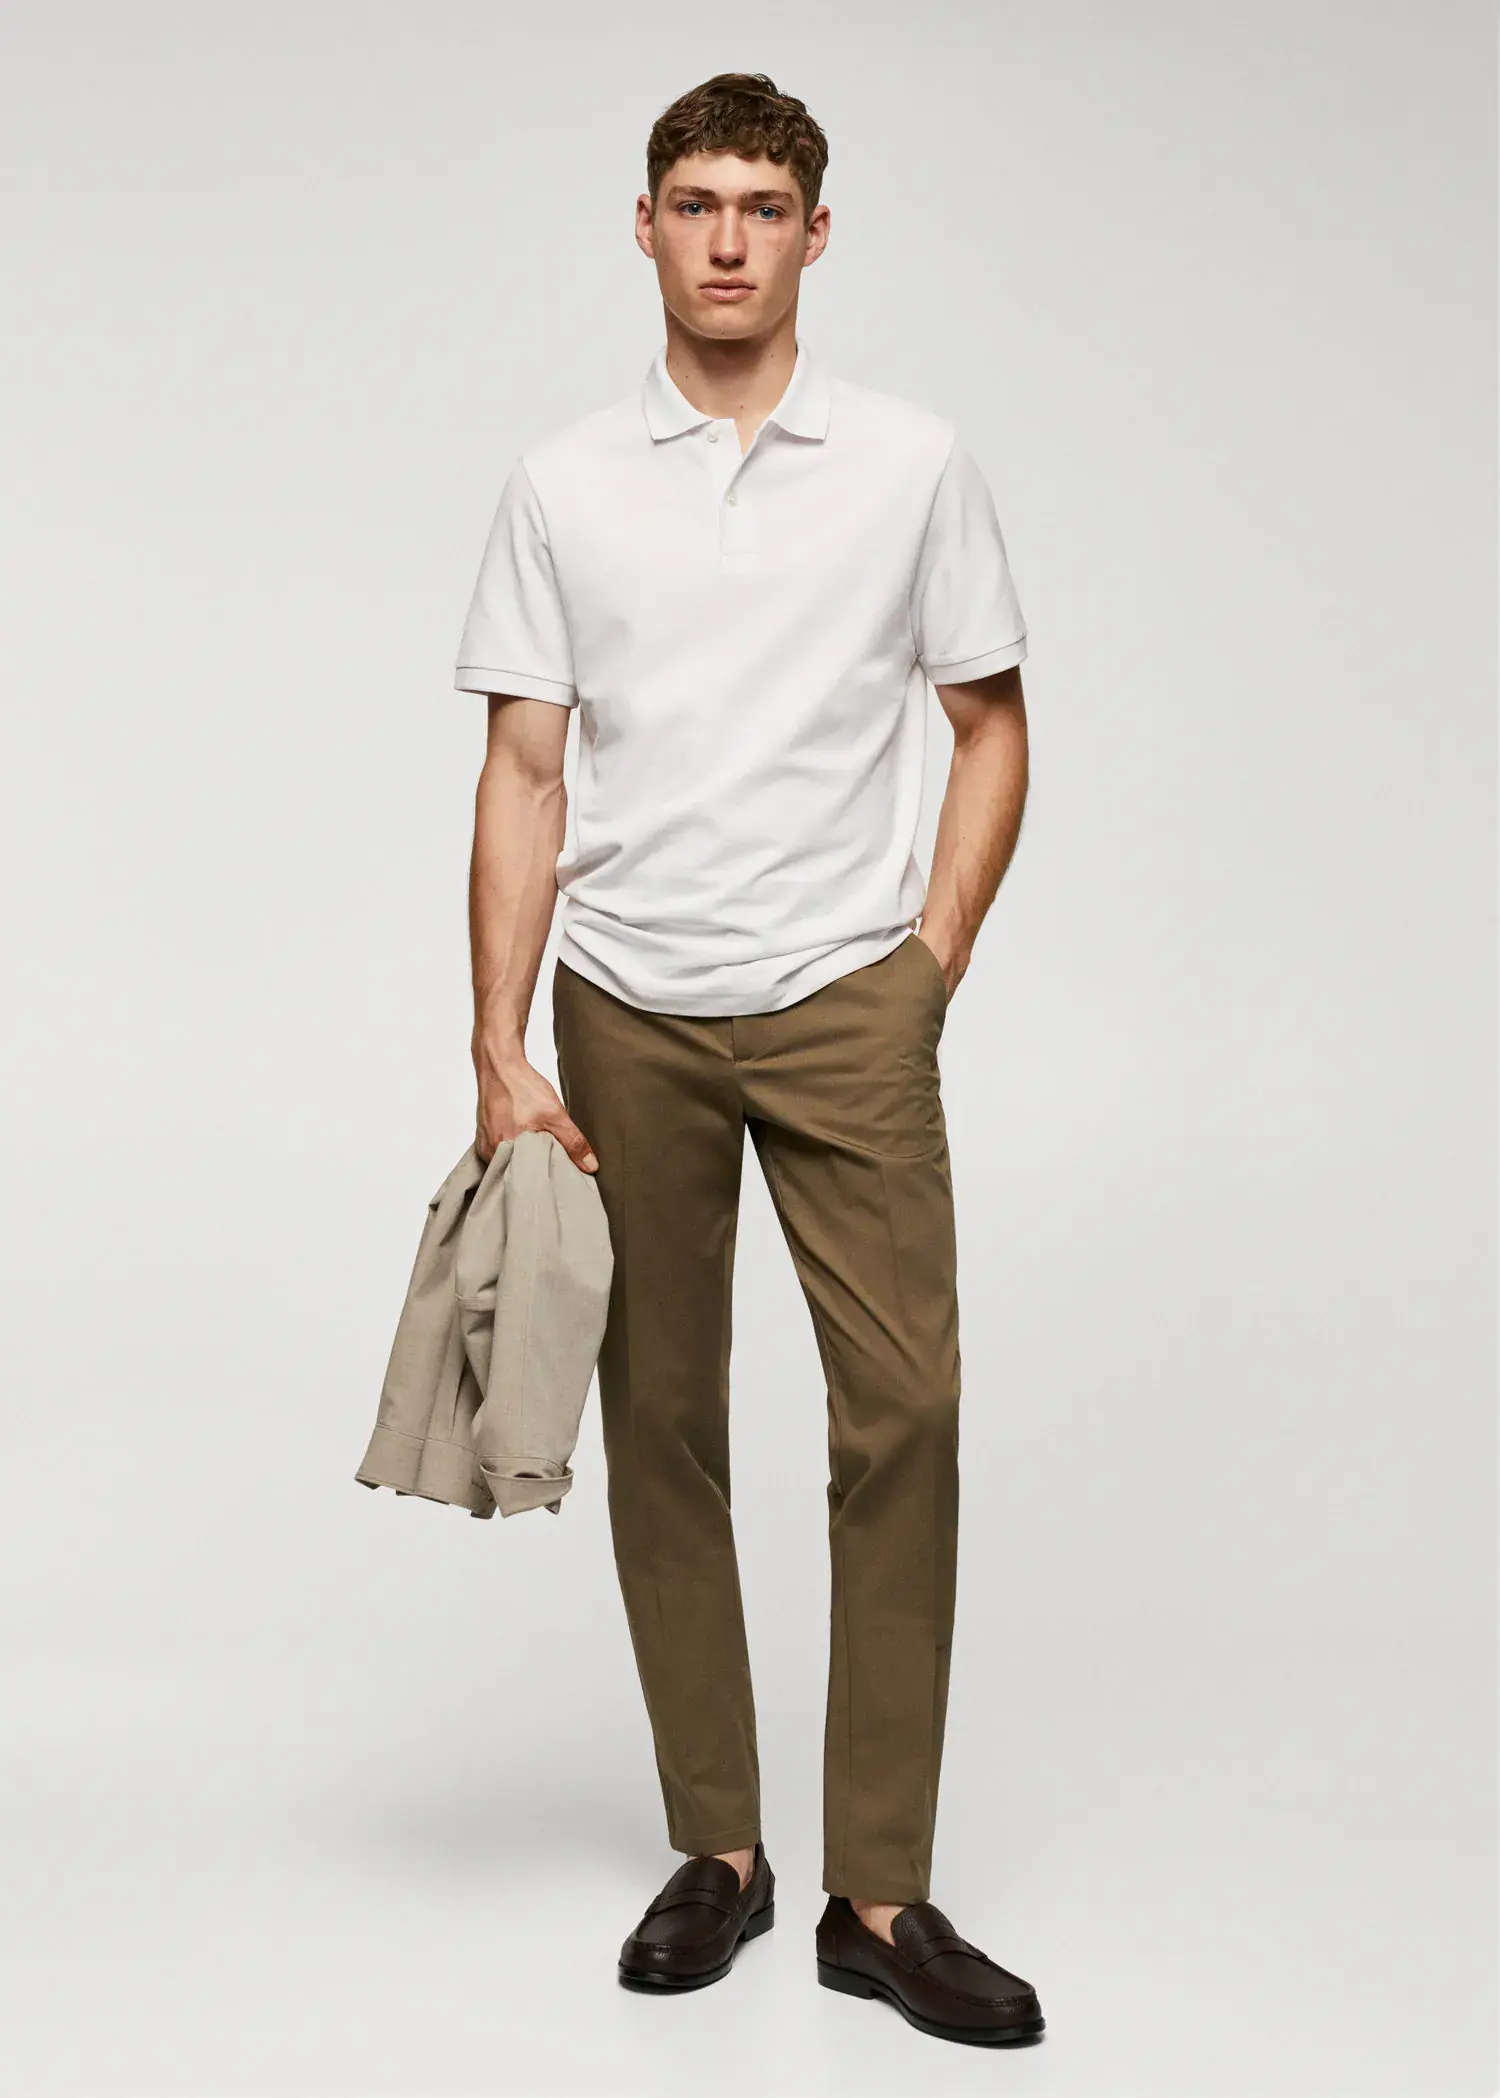 Mango Slim fit chino trousers. a man in a white shirt holding a jacket. 